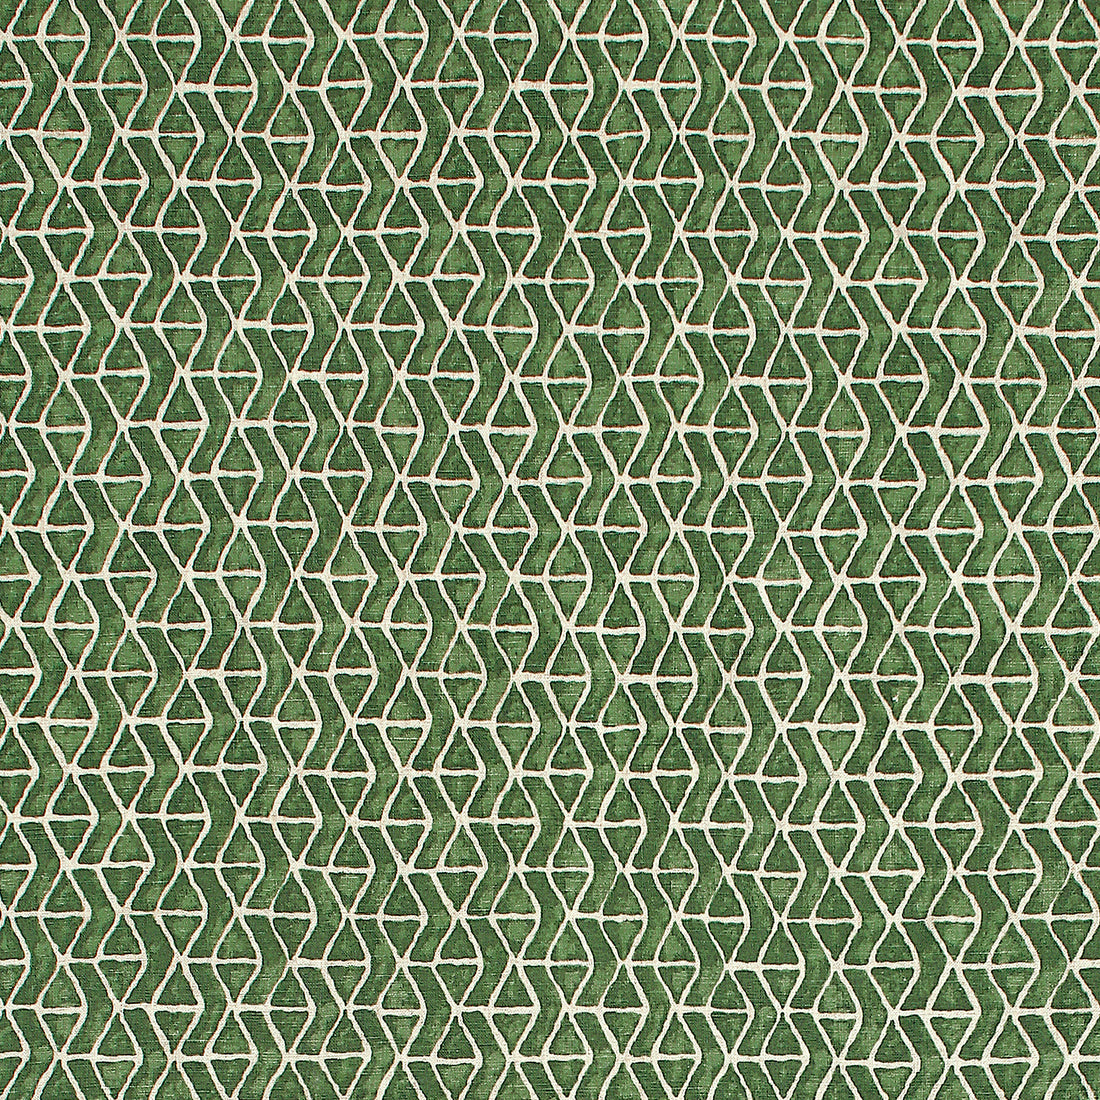 Stony Brook fabric in green color - pattern number F942004 - by Thibaut in the Sojourn collection